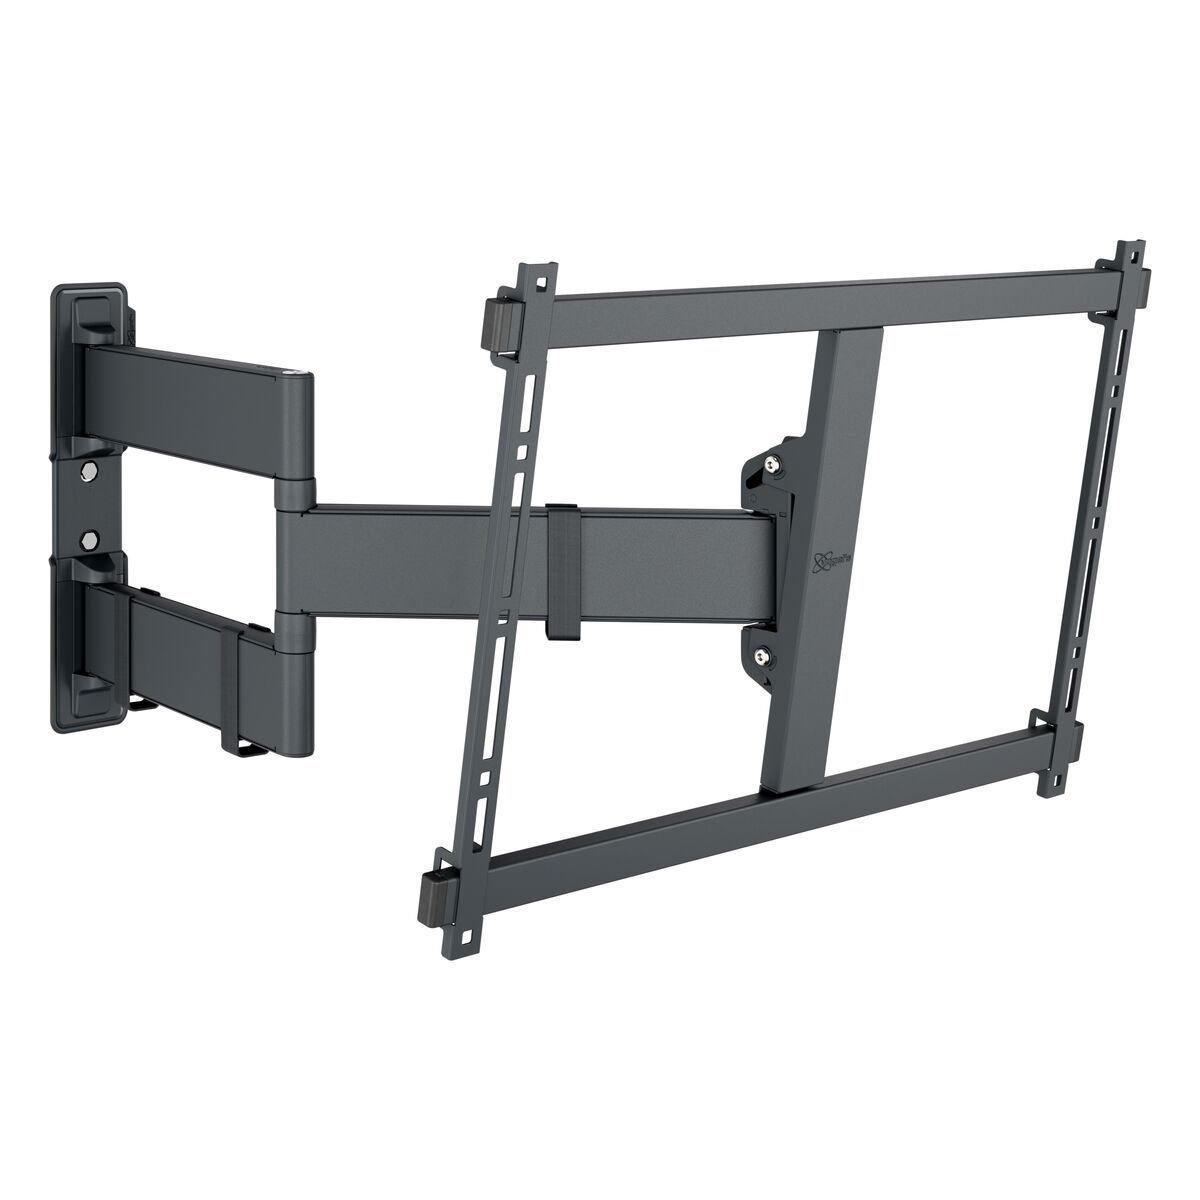 Vogel's TVM 3845 Full-Motion TV Wall Mount (black) - Suitable for 55 up to 100 inch TVs - Full motion (up to 180°) swivel - Tilt up to 10° - Product